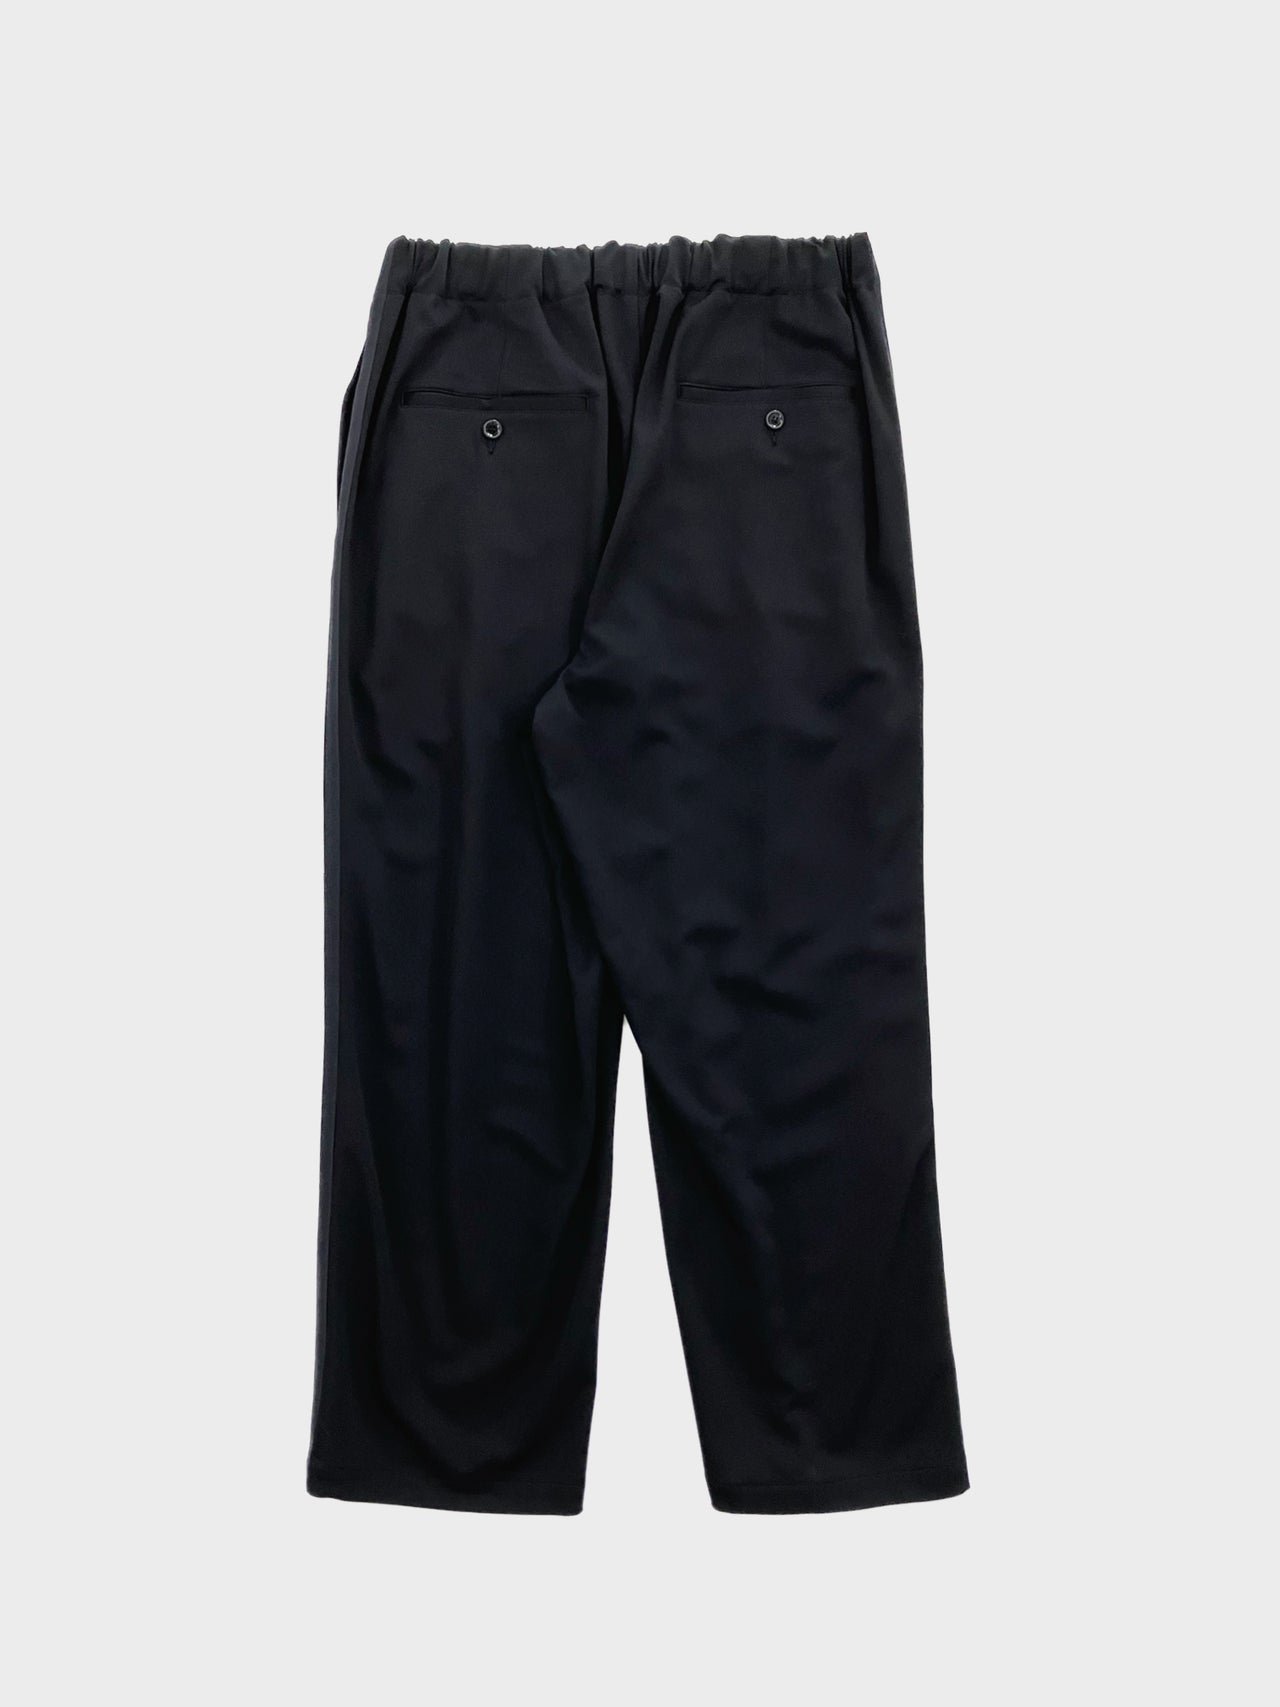 WEWILL / INFORMAL TROUSERS (BLACK)